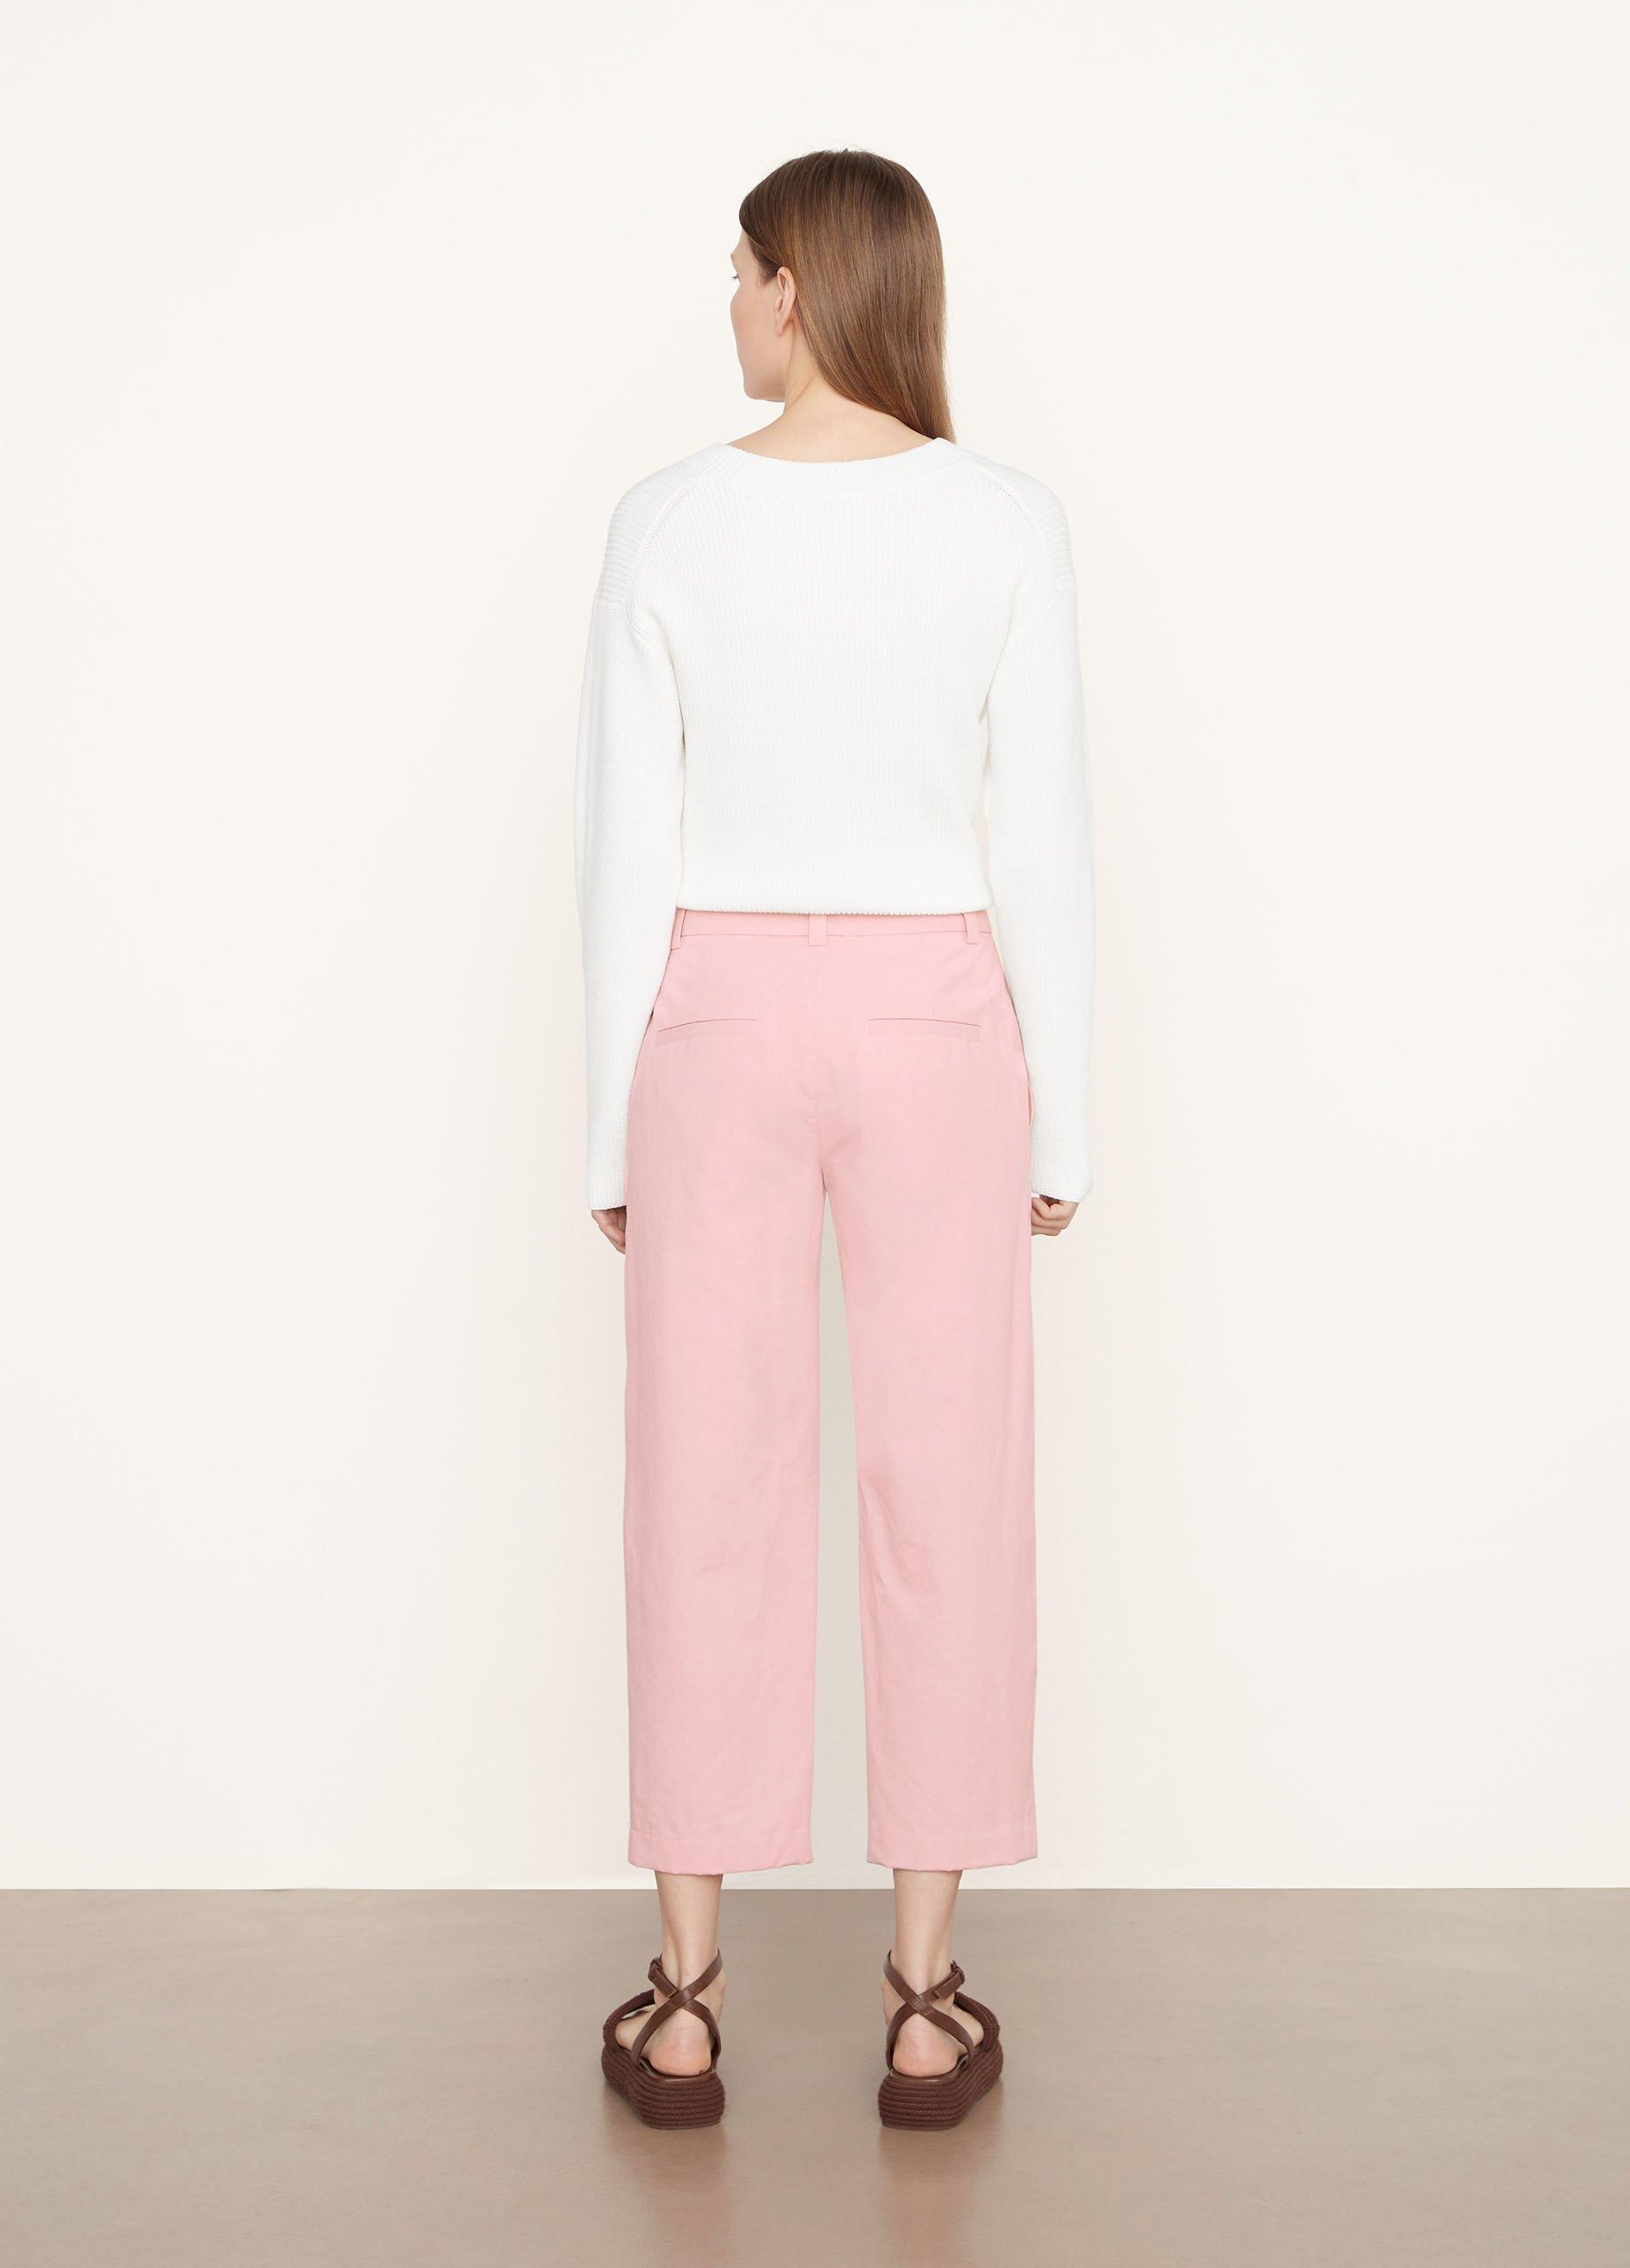 Washed Cotton Crop Pant in Pants & Shorts | Vince